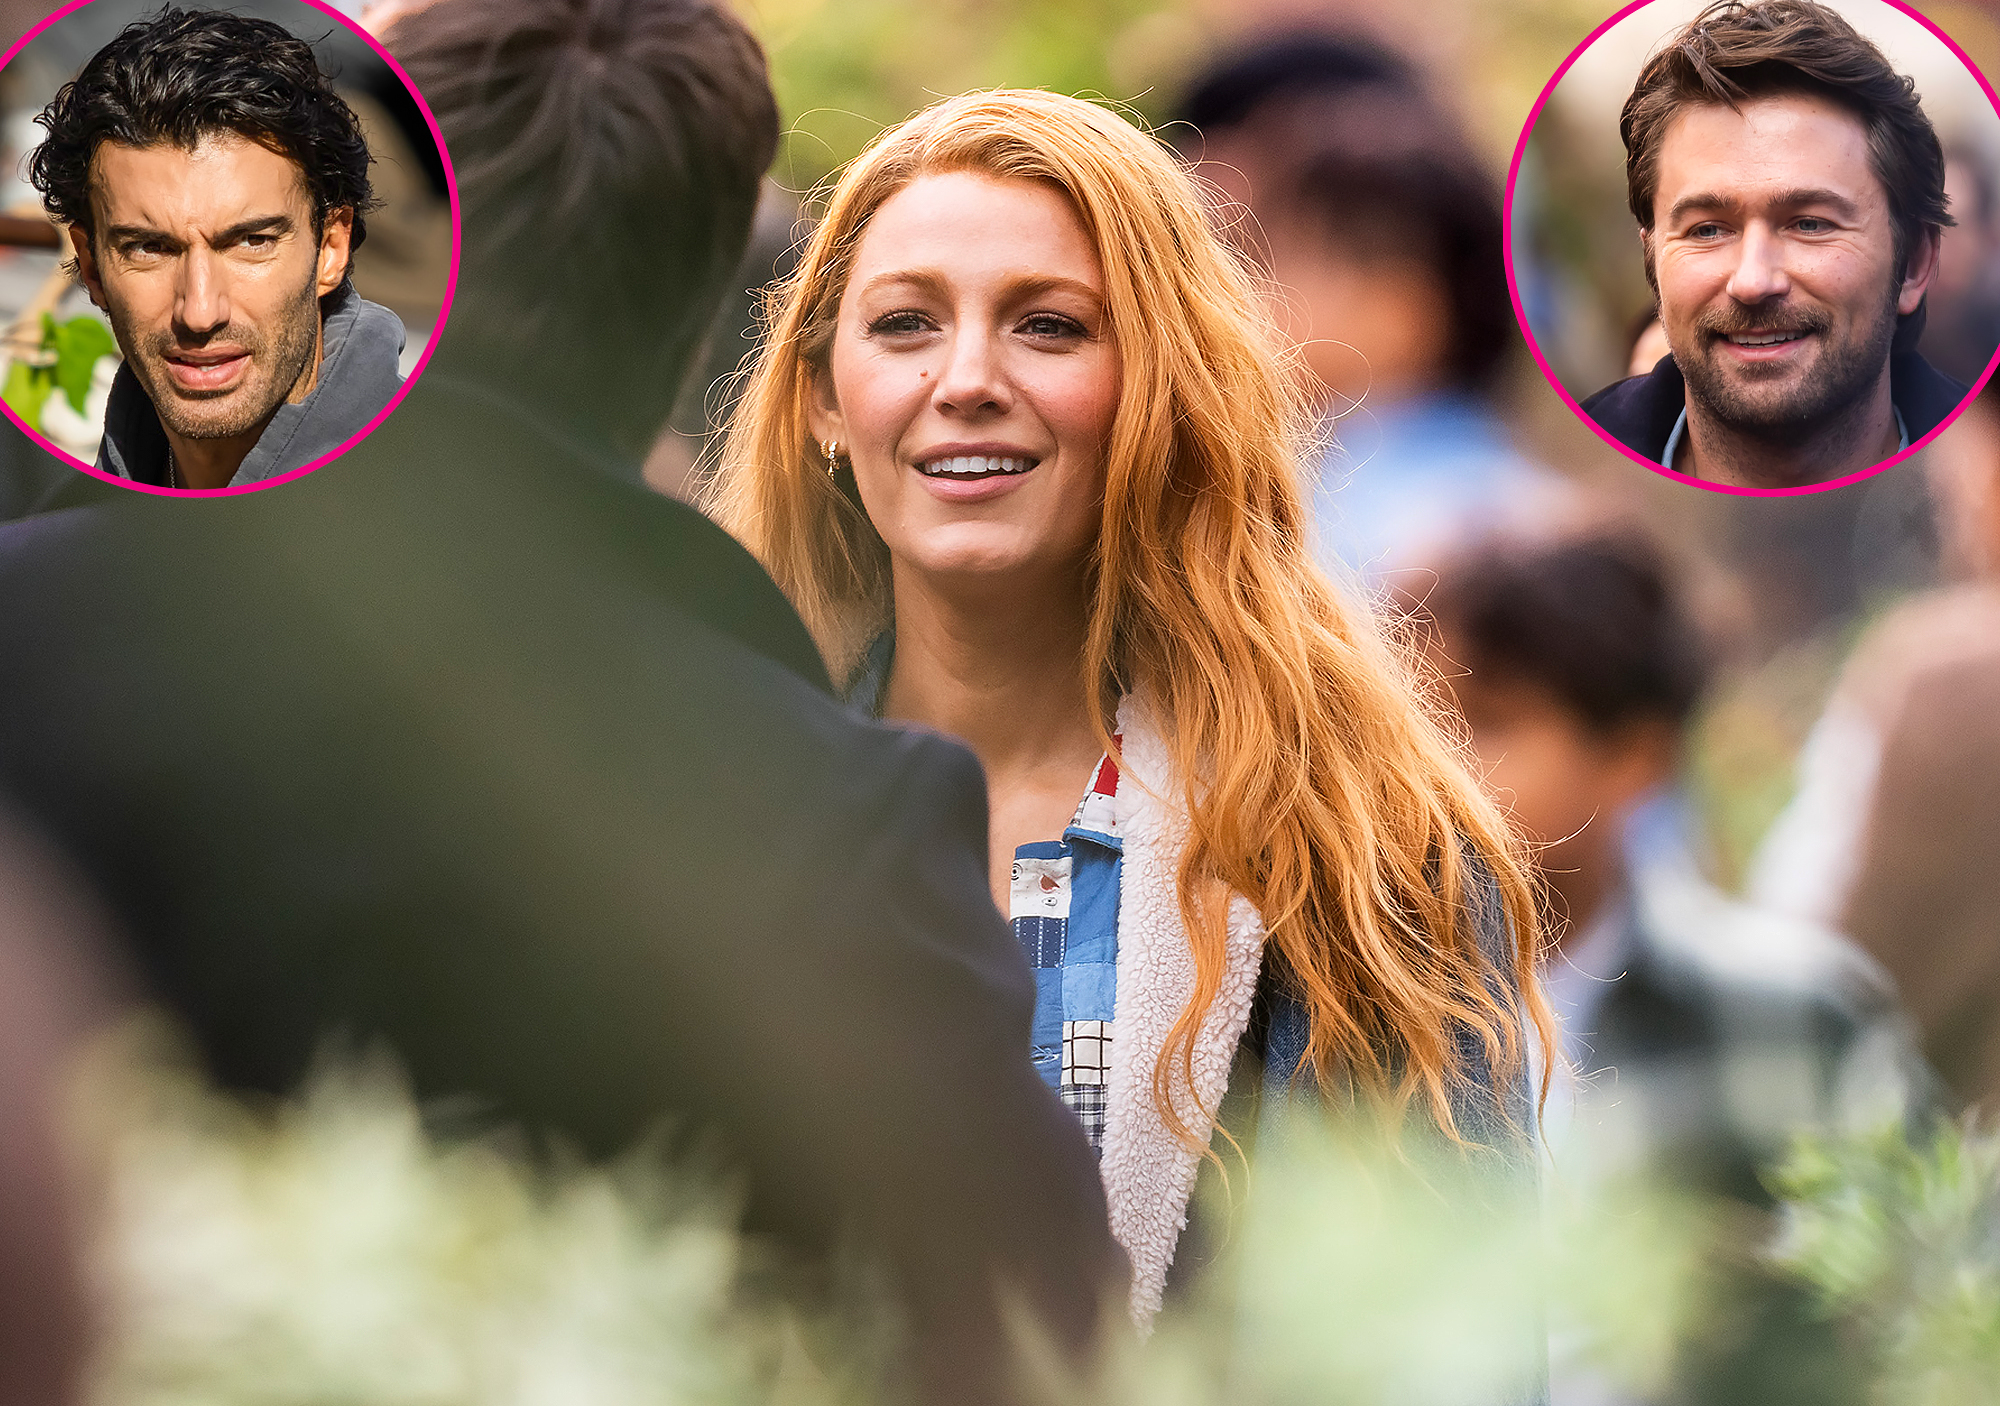 Blake Lively's Movie 'It Ends with Us' Gets New Summer Release Date